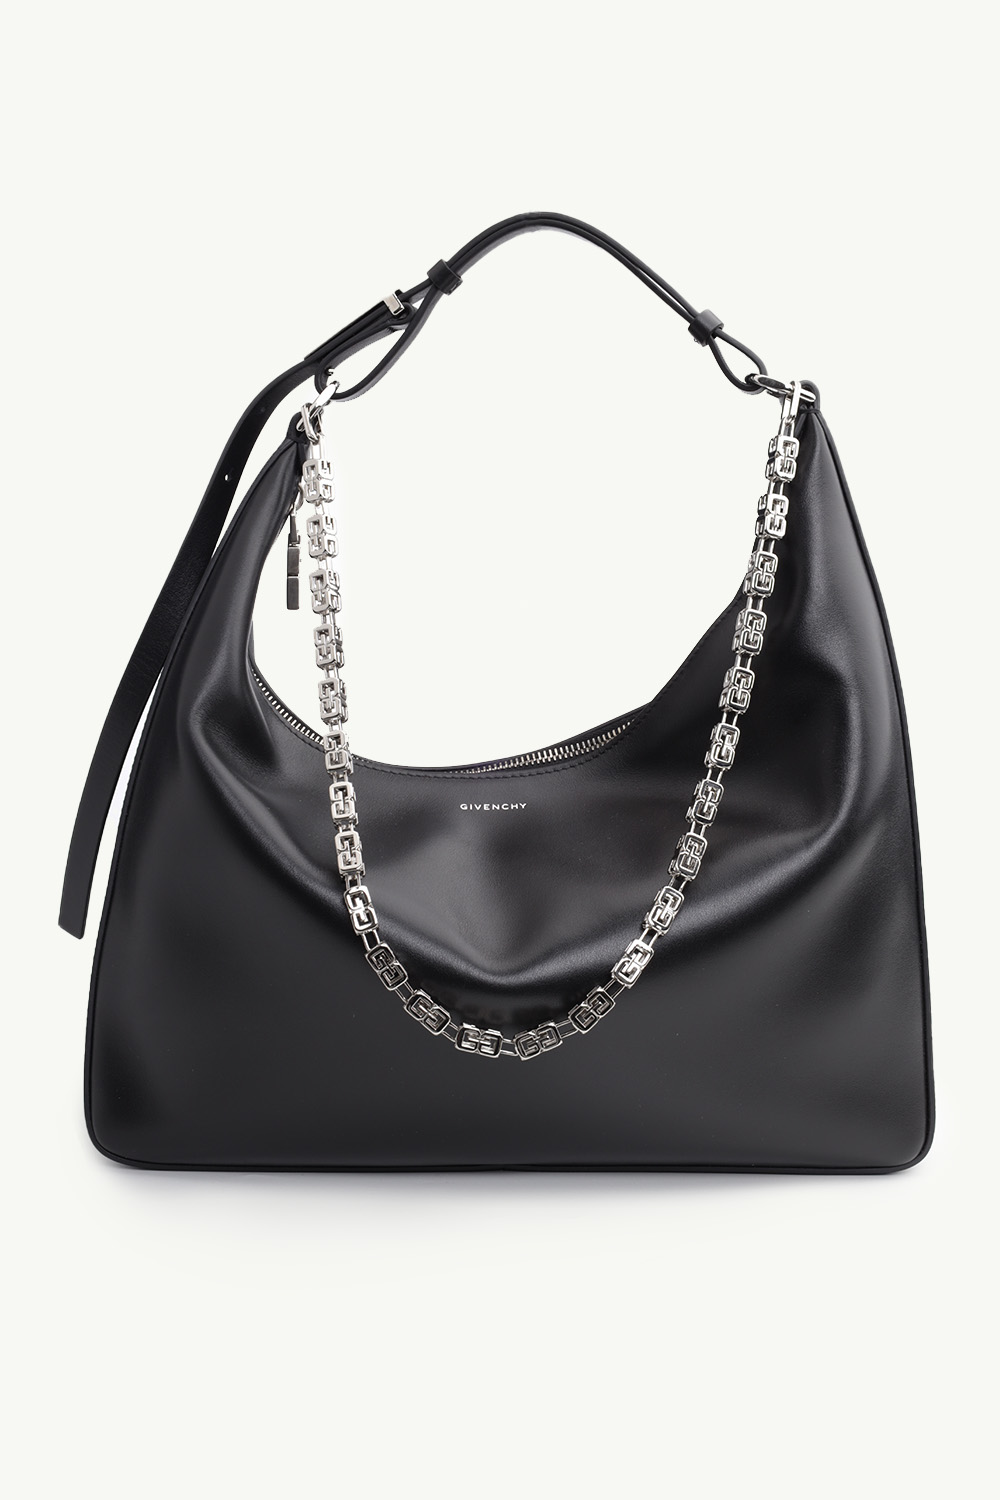 GIVENCHY Medium Moon Cut Out Bag in Black Smooth Leather 0